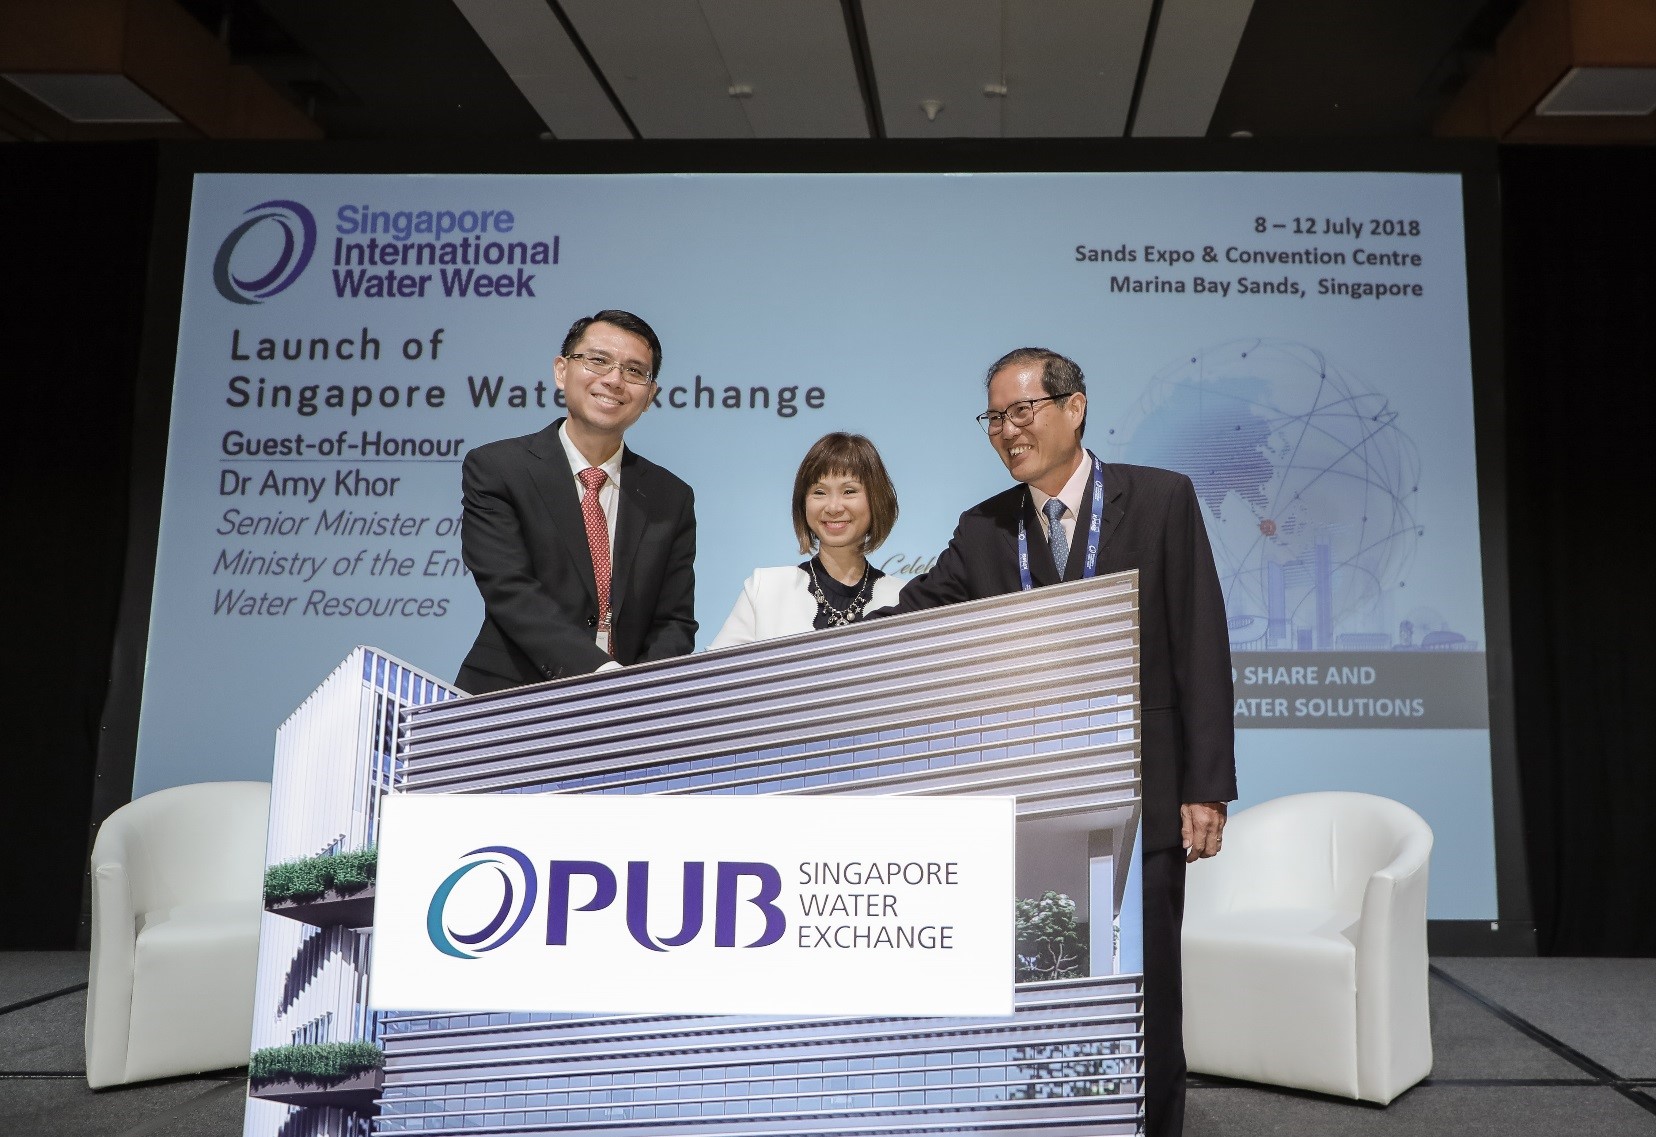 top-10-moments-from-the-singapore-international-water-week-2018---6.jpg